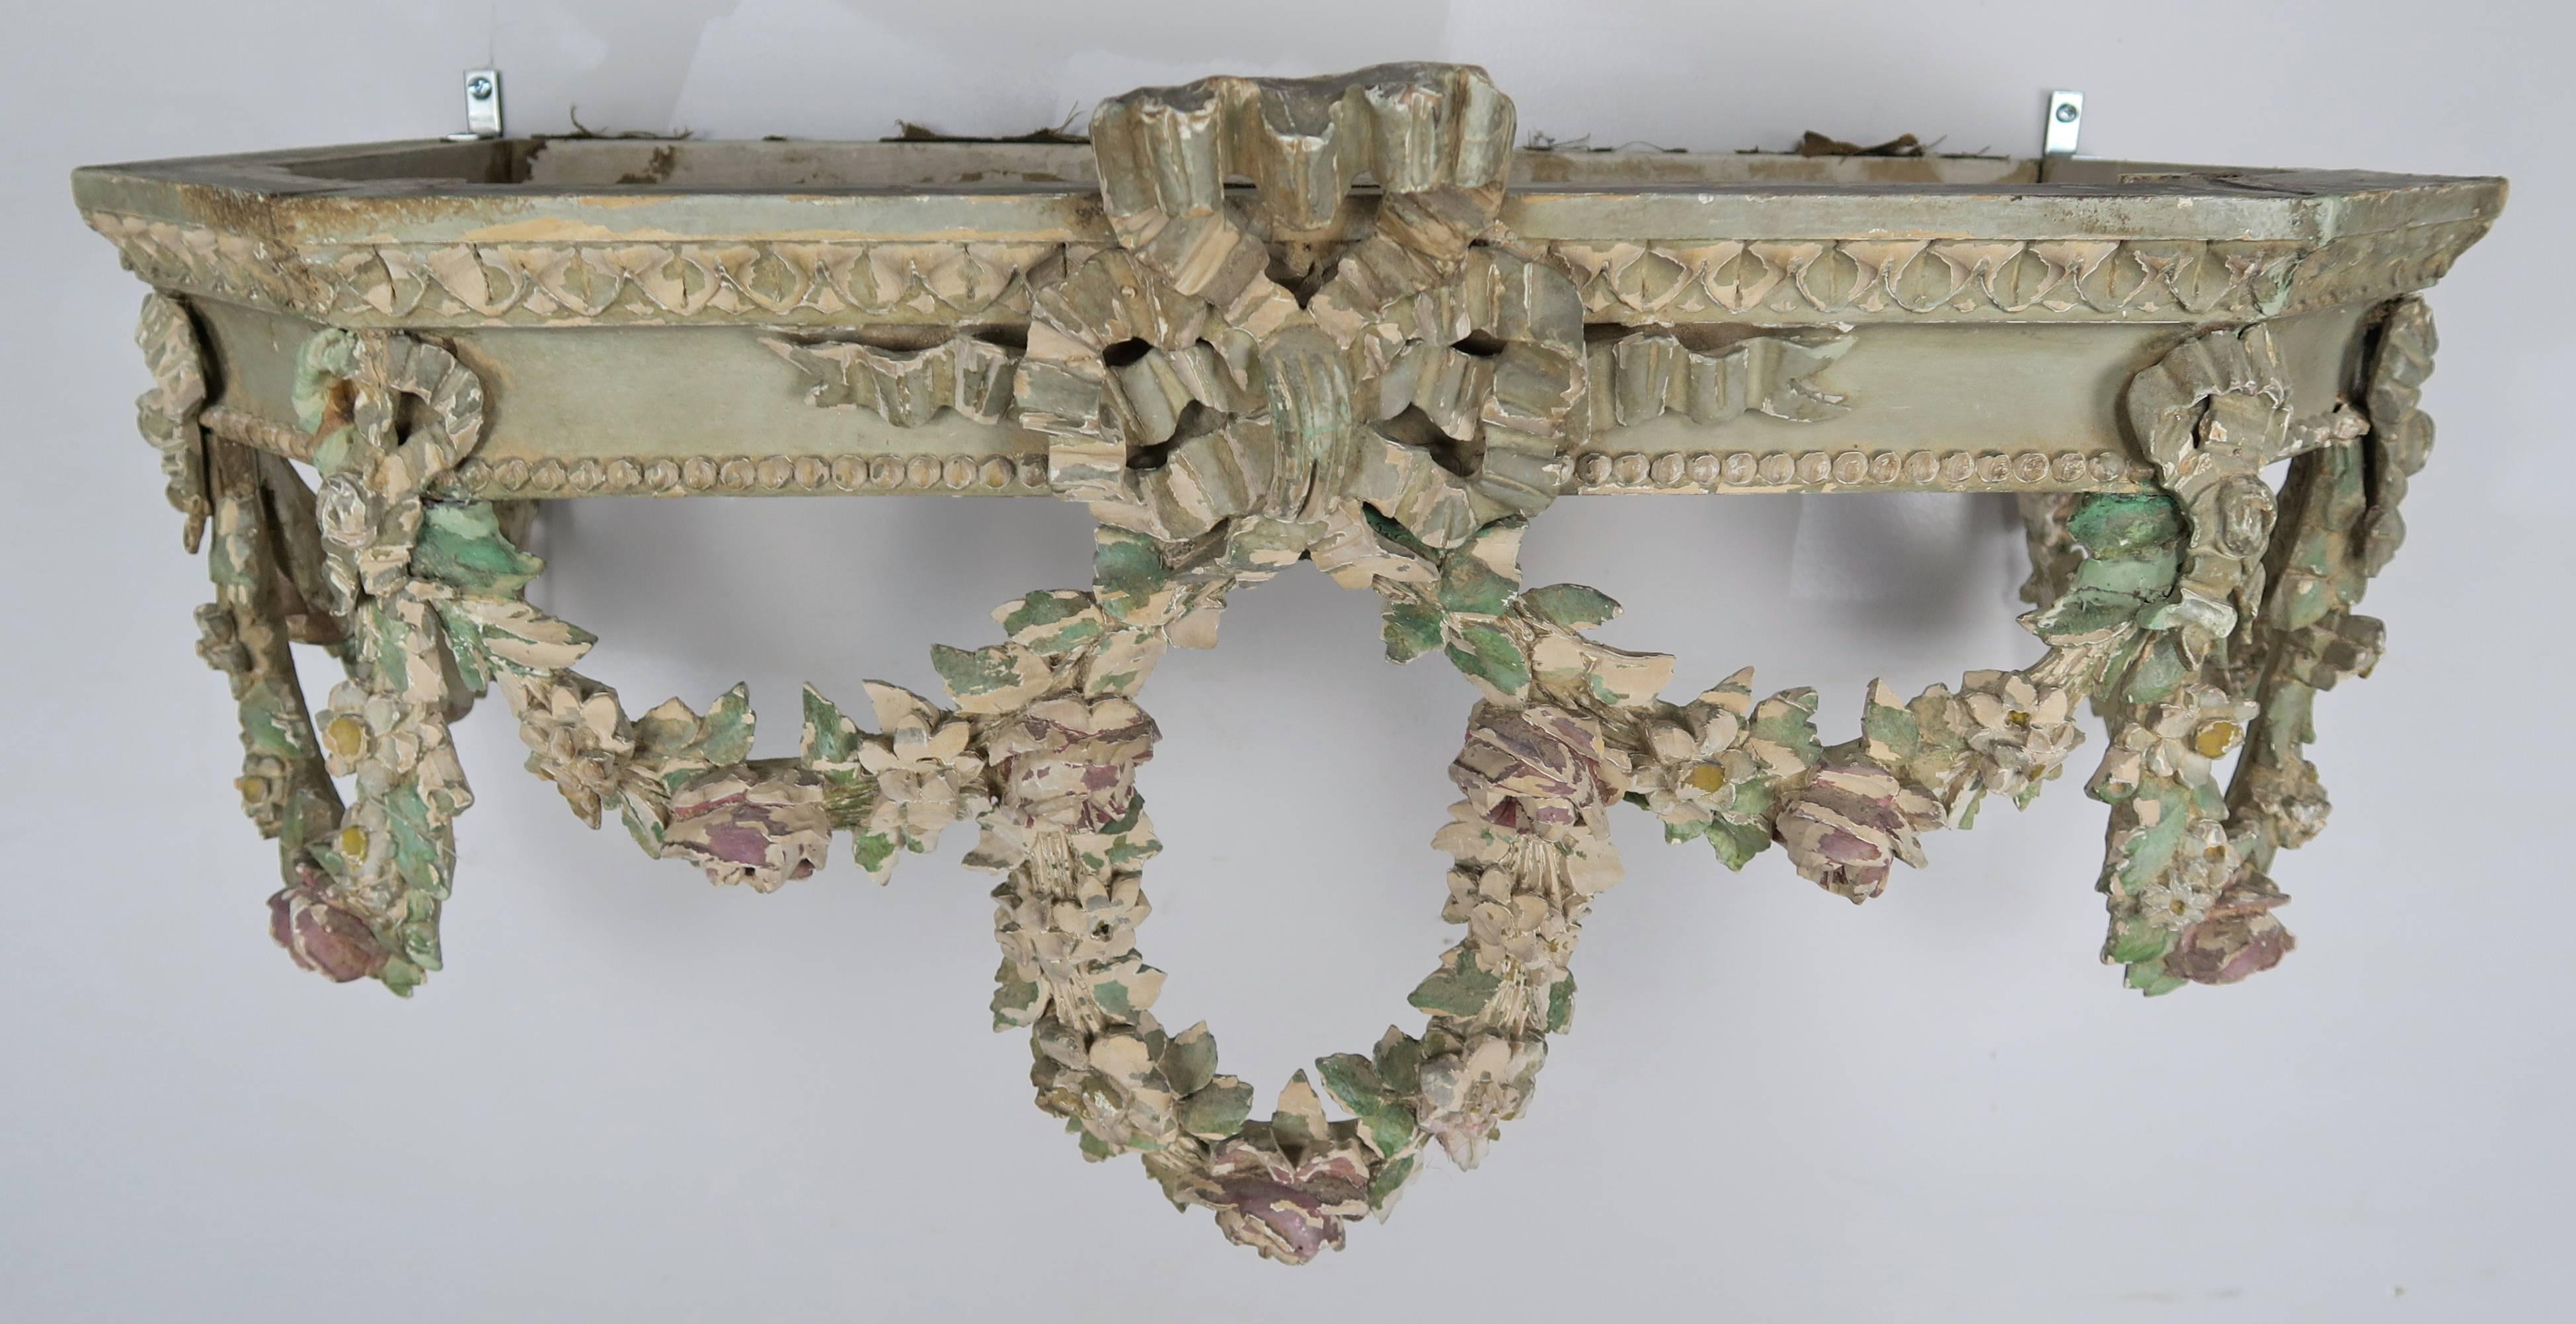 19th century French carved wood bed canopy depicting a centre bow with garlands of flowers throughout.